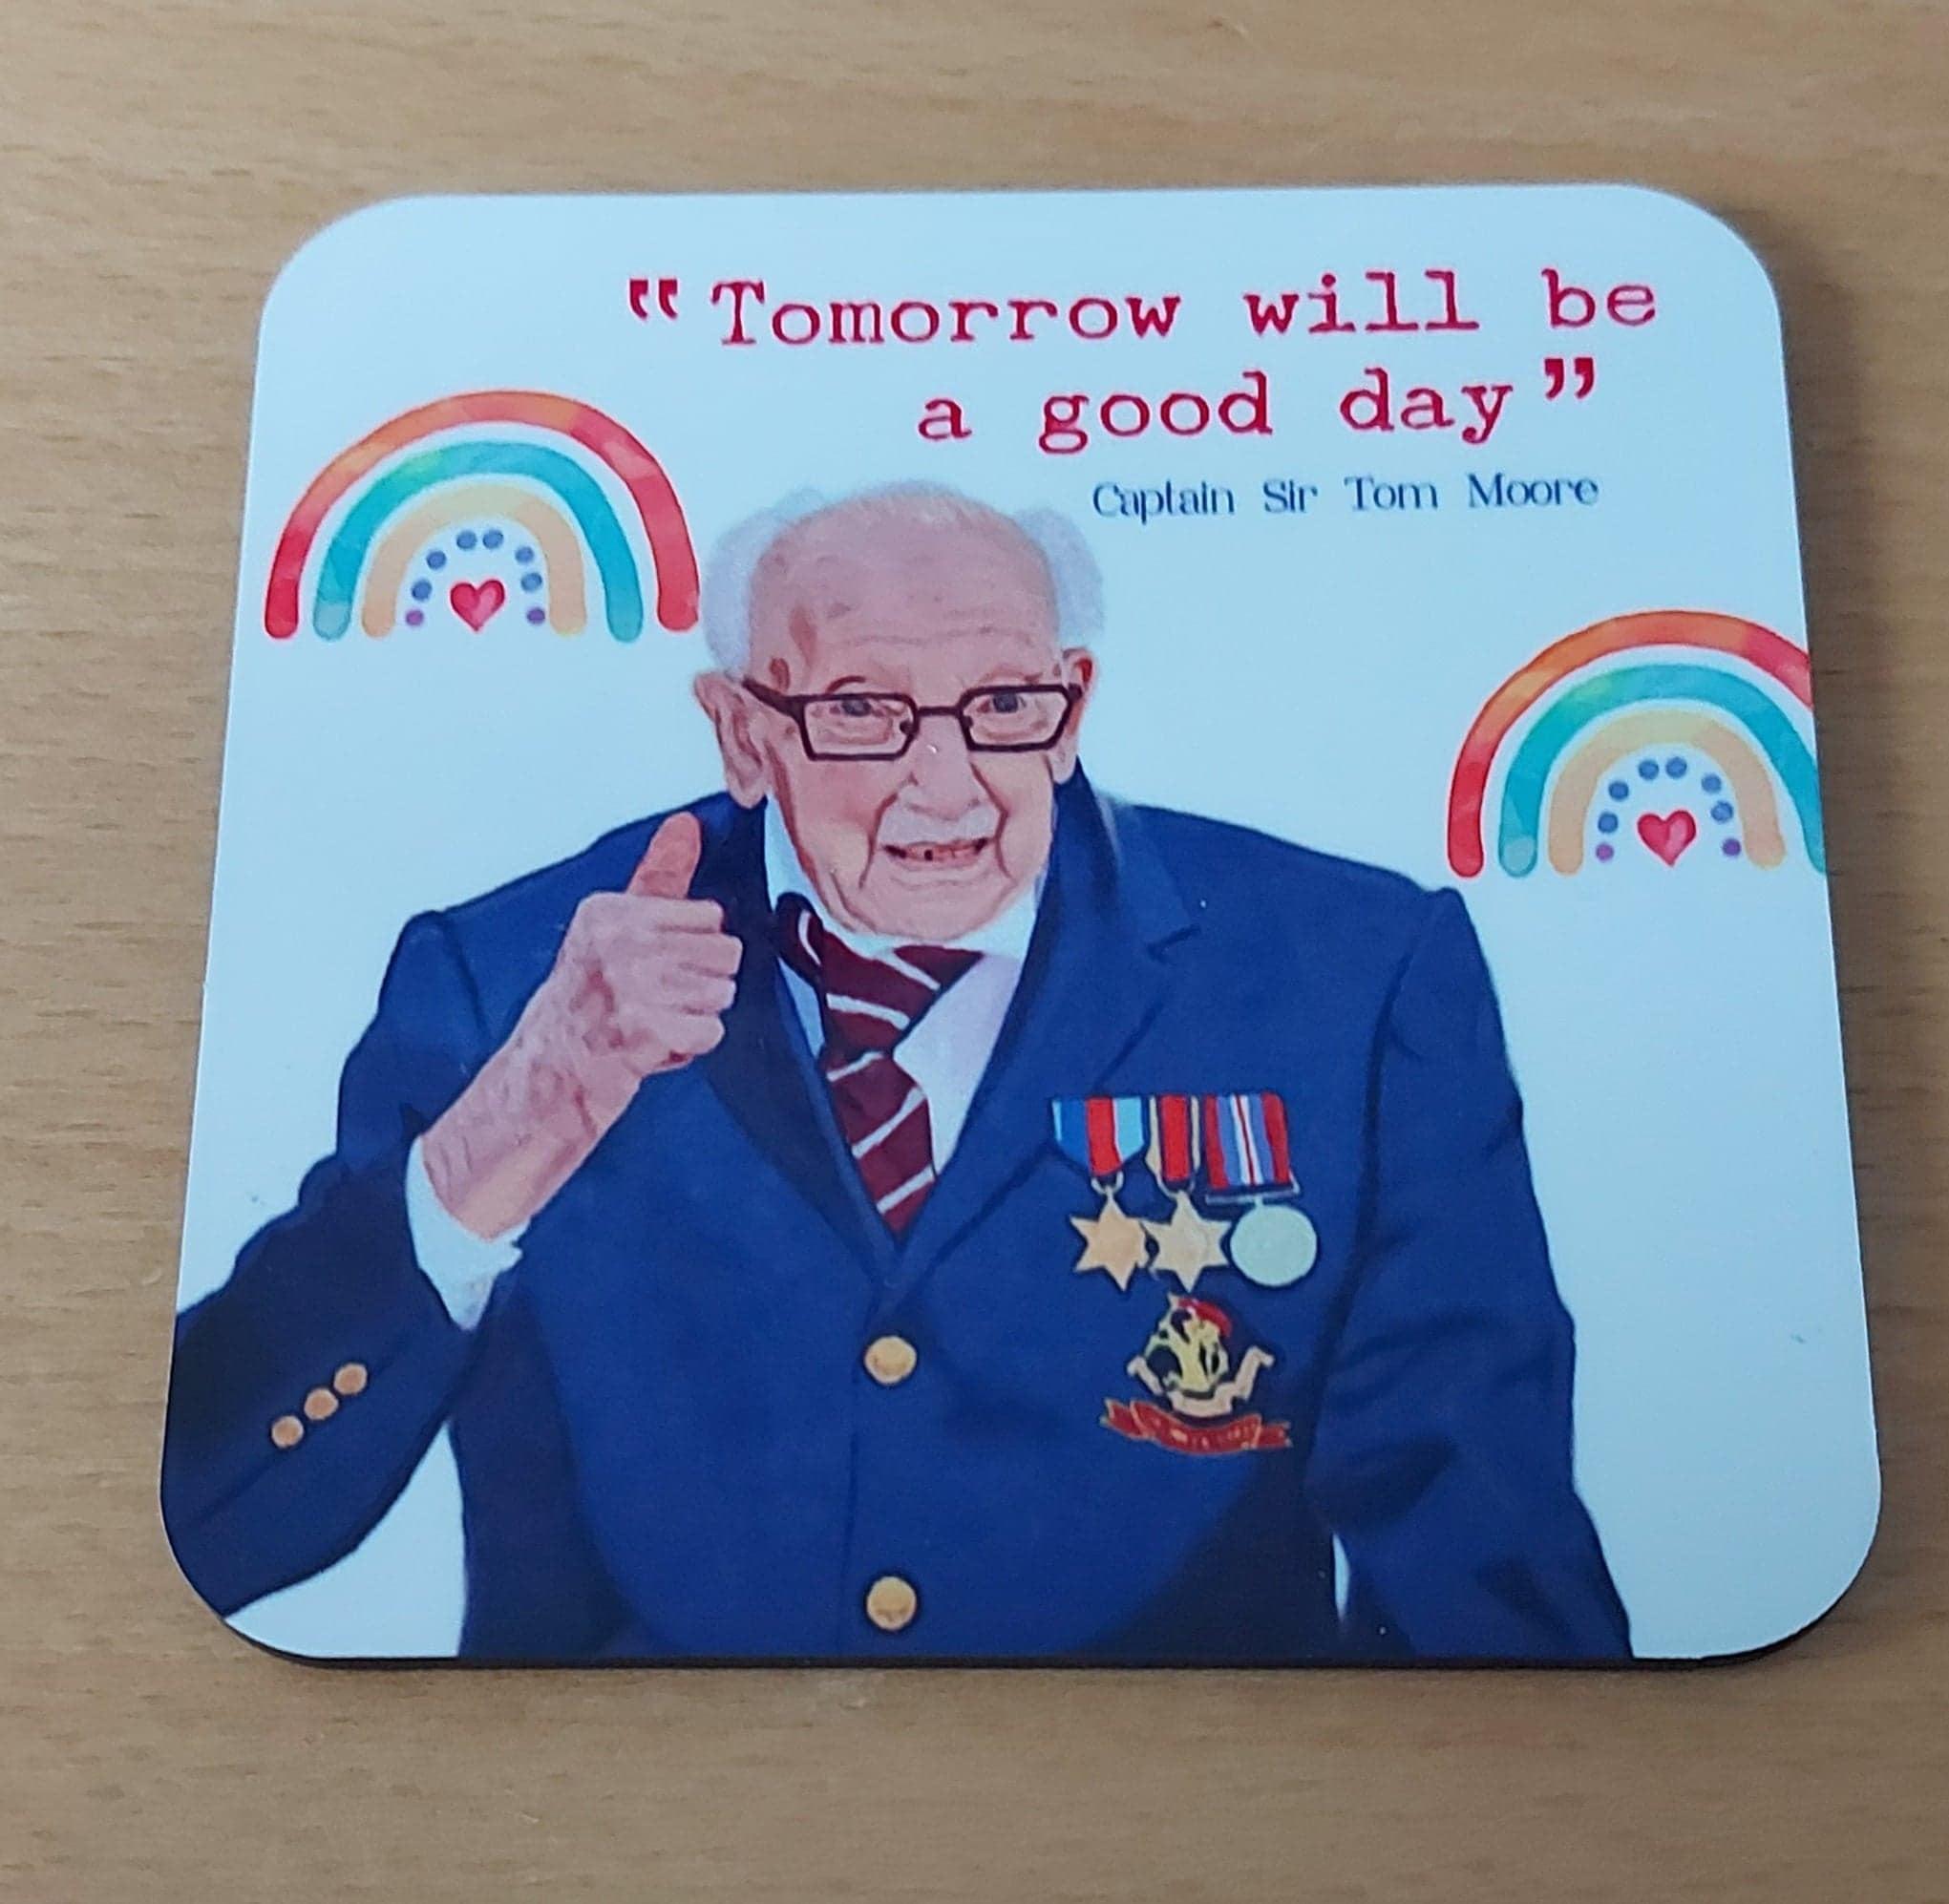 NHS Hero-Captain Sir Tom Moore - Tomorrow will be a good day - Inspirational - motivational coaster - NHS -Rainbow